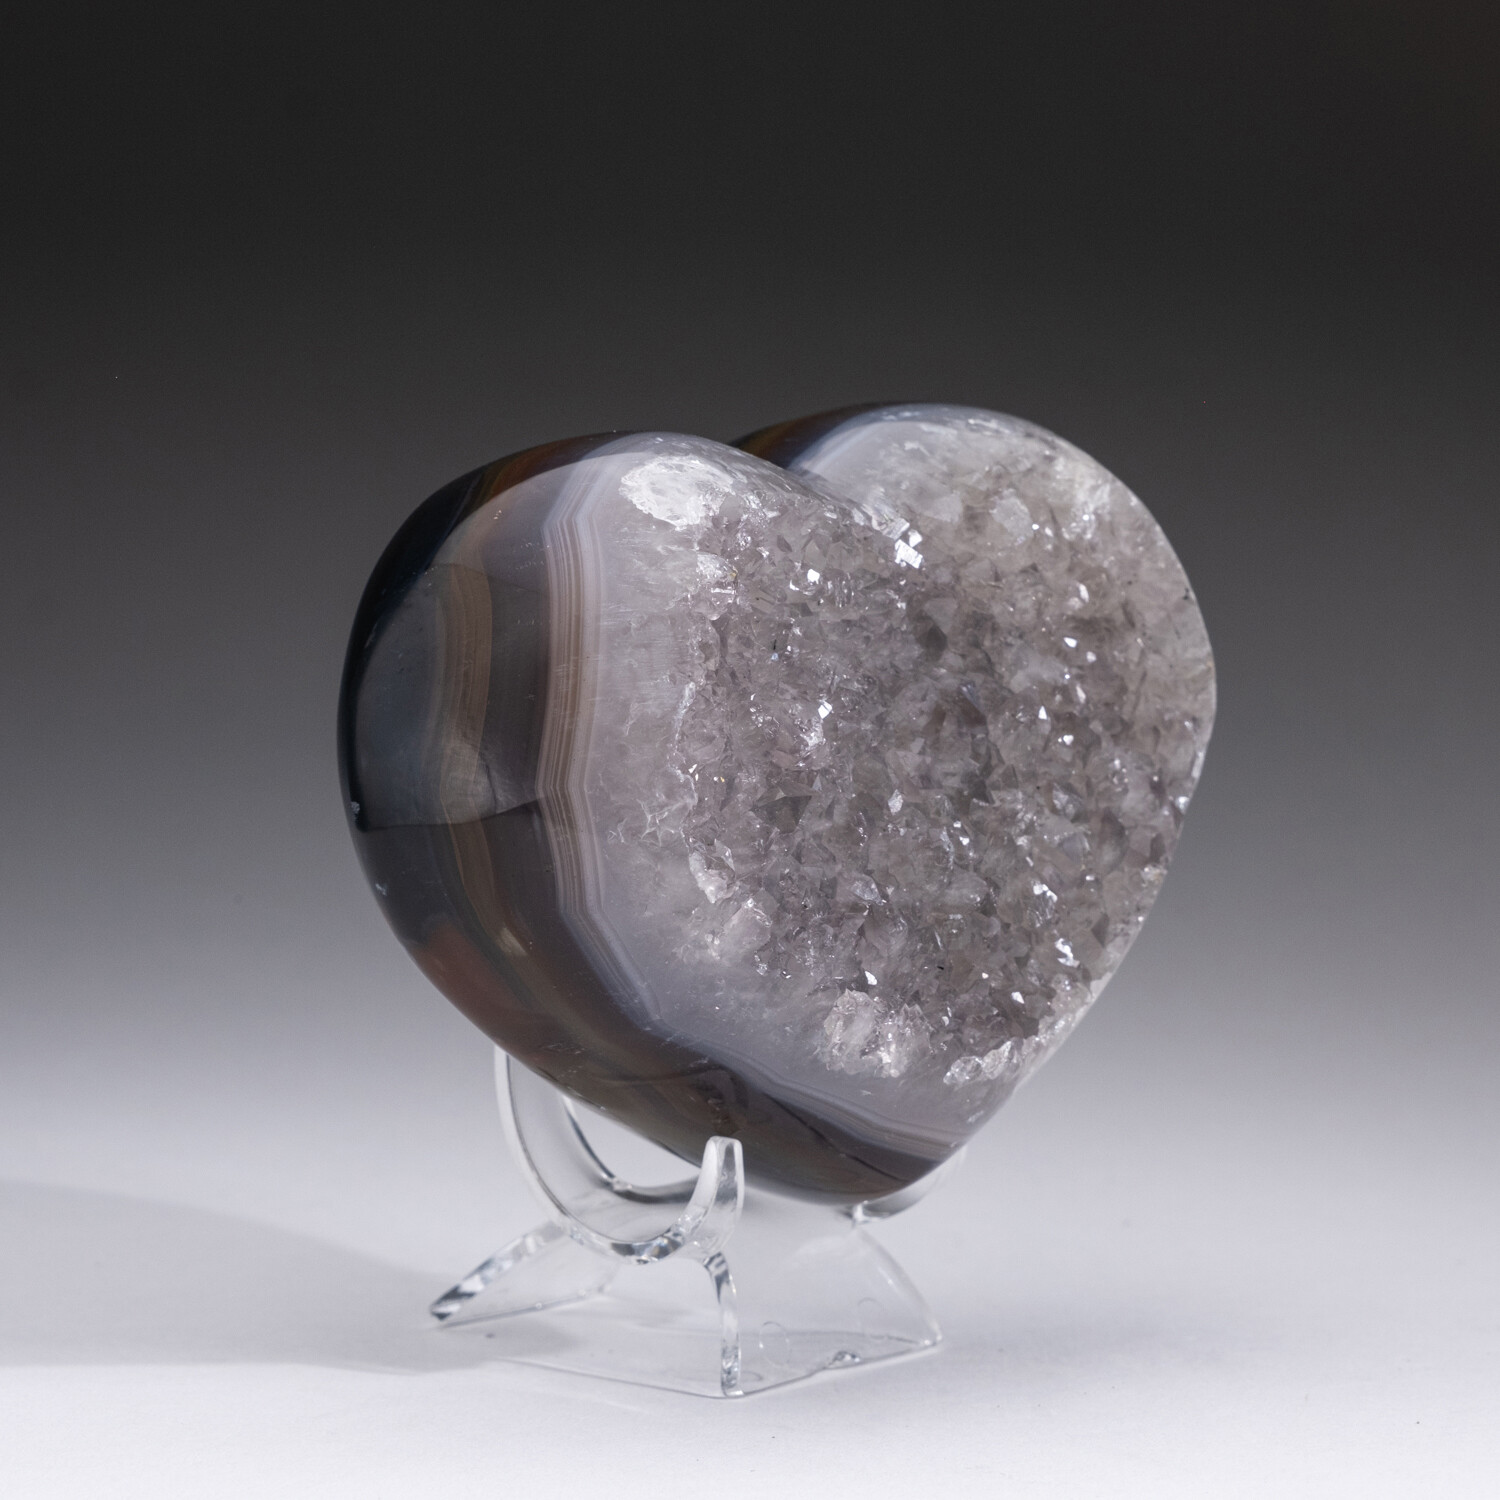 Genuine Agate and Quartz Crystal Cluster Heart + Acrylic Display Stand ...